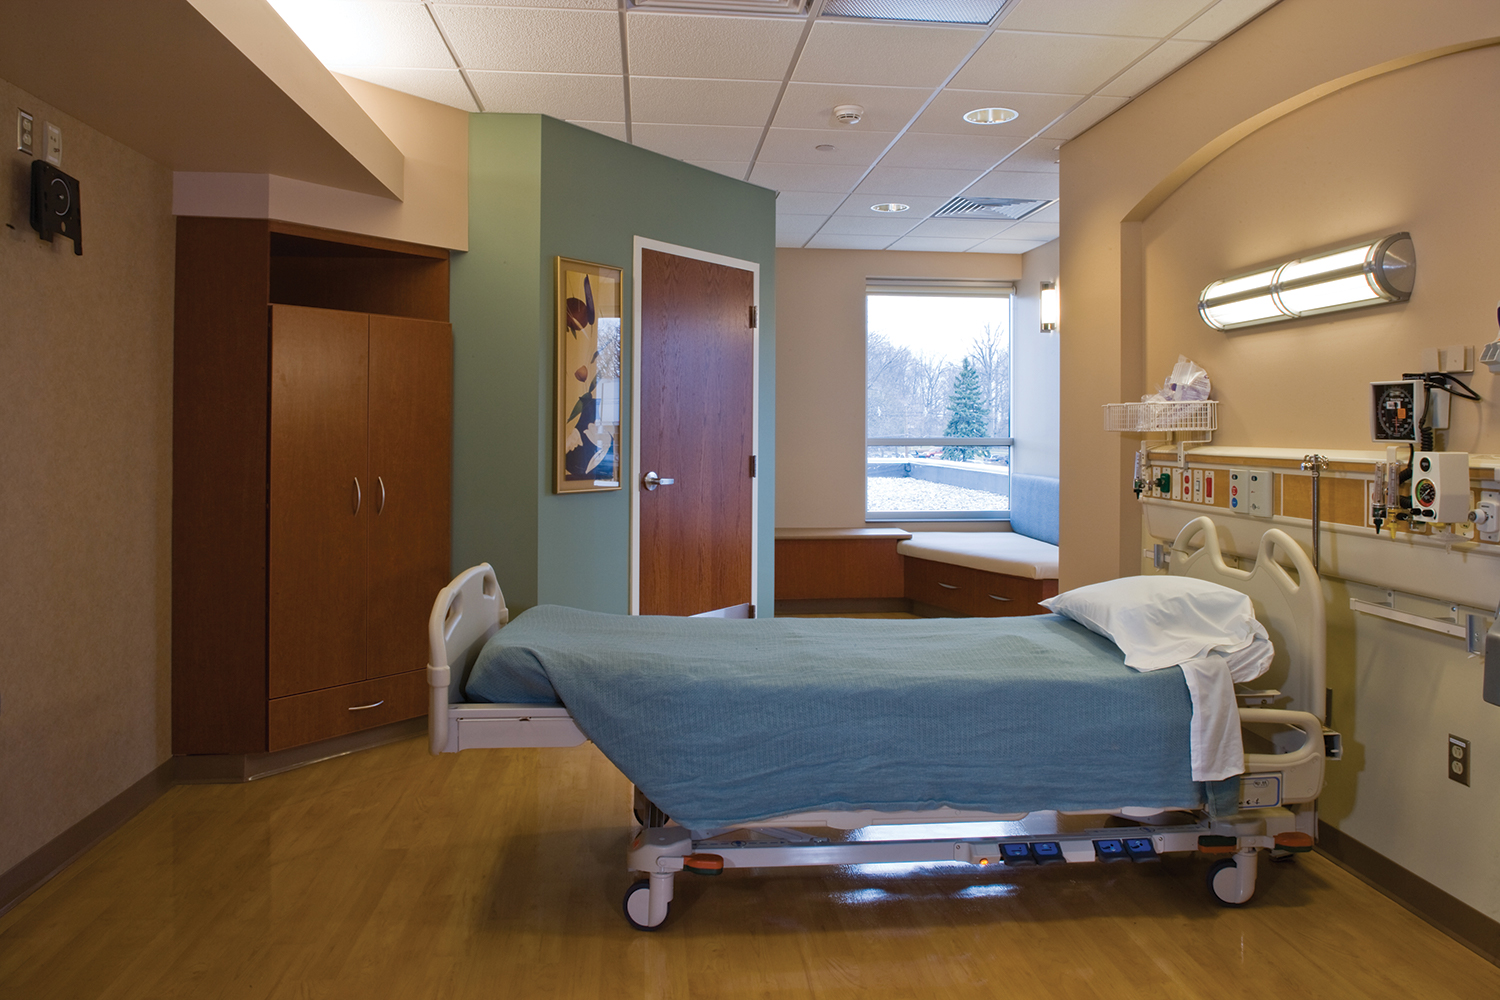 Avatar wall mounted fixture as a headwall in a patient room for sophisticated hospital lighting design.